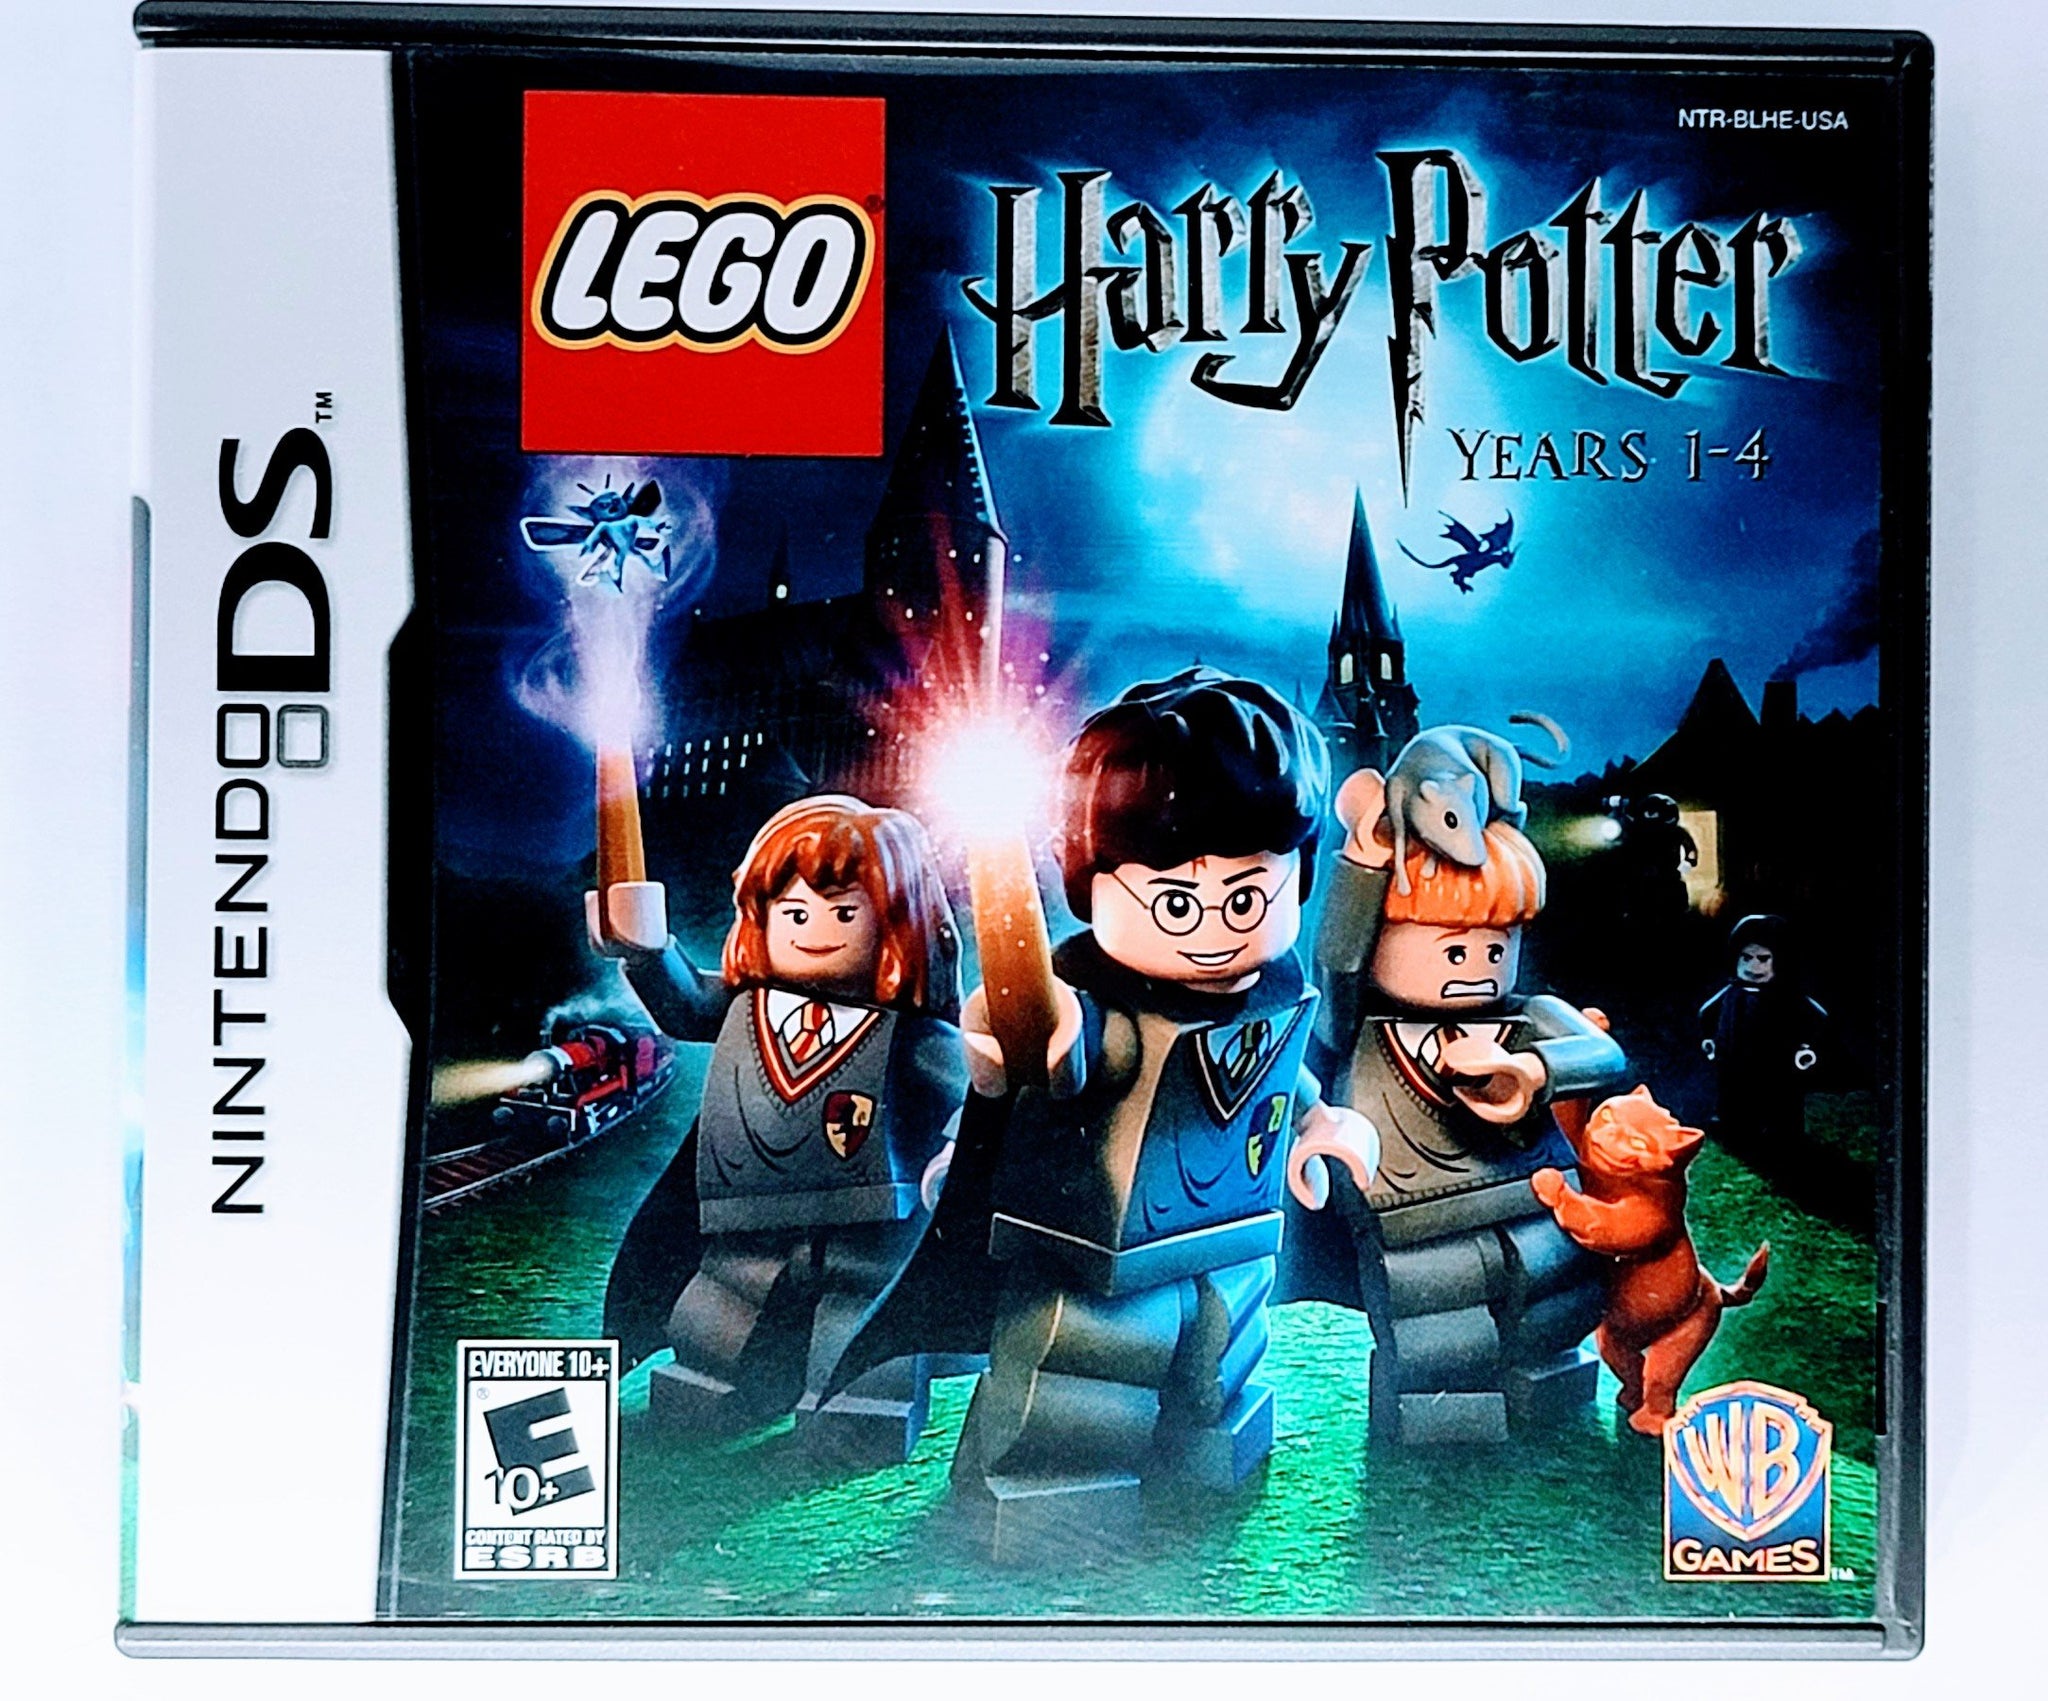 LEGO Harry Potter: Years 1-4 Nintendo DS (2010): Magical Adventures Aw